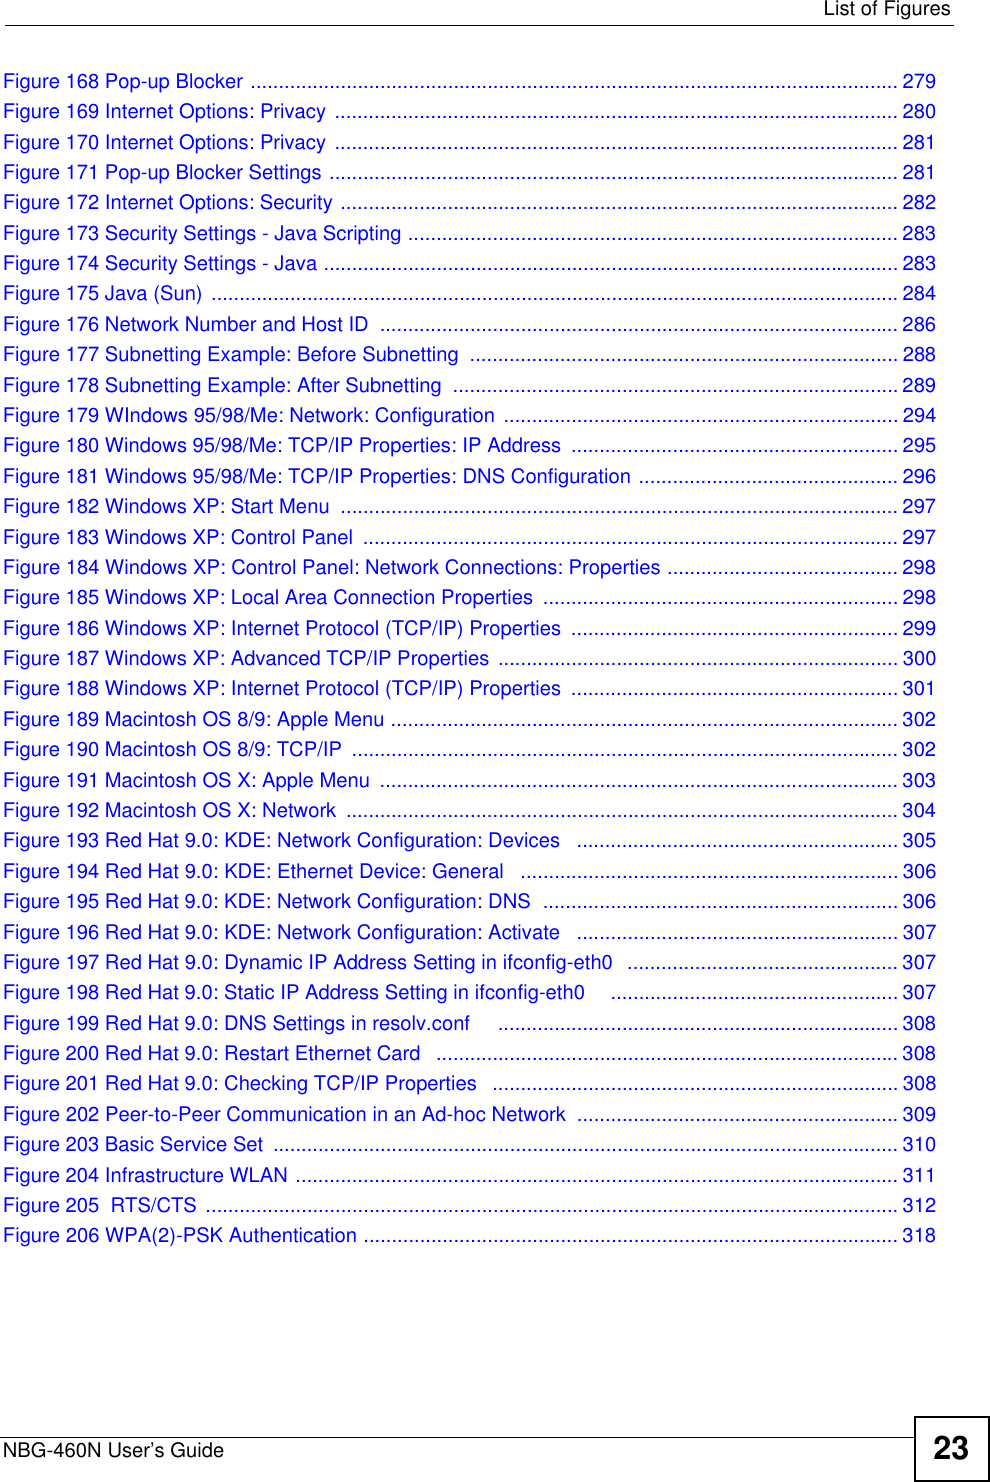  List of FiguresNBG-460N User’s Guide 23Figure 168 Pop-up Blocker ................................................................................................................... 279Figure 169 Internet Options: Privacy  .................................................................................................... 280Figure 170 Internet Options: Privacy  .................................................................................................... 281Figure 171 Pop-up Blocker Settings ..................................................................................................... 281Figure 172 Internet Options: Security ................................................................................................... 282Figure 173 Security Settings - Java Scripting ....................................................................................... 283Figure 174 Security Settings - Java ...................................................................................................... 283Figure 175 Java (Sun) .......................................................................................................................... 284Figure 176 Network Number and Host ID  ............................................................................................ 286Figure 177 Subnetting Example: Before Subnetting  ............................................................................ 288Figure 178 Subnetting Example: After Subnetting  ............................................................................... 289Figure 179 WIndows 95/98/Me: Network: Configuration  ...................................................................... 294Figure 180 Windows 95/98/Me: TCP/IP Properties: IP Address  .......................................................... 295Figure 181 Windows 95/98/Me: TCP/IP Properties: DNS Configuration .............................................. 296Figure 182 Windows XP: Start Menu  ................................................................................................... 297Figure 183 Windows XP: Control Panel  ............................................................................................... 297Figure 184 Windows XP: Control Panel: Network Connections: Properties ......................................... 298Figure 185 Windows XP: Local Area Connection Properties  ............................................................... 298Figure 186 Windows XP: Internet Protocol (TCP/IP) Properties  .......................................................... 299Figure 187 Windows XP: Advanced TCP/IP Properties ....................................................................... 300Figure 188 Windows XP: Internet Protocol (TCP/IP) Properties  .......................................................... 301Figure 189 Macintosh OS 8/9: Apple Menu .......................................................................................... 302Figure 190 Macintosh OS 8/9: TCP/IP  ................................................................................................. 302Figure 191 Macintosh OS X: Apple Menu  ............................................................................................ 303Figure 192 Macintosh OS X: Network  .................................................................................................. 304Figure 193 Red Hat 9.0: KDE: Network Configuration: Devices   ......................................................... 305Figure 194 Red Hat 9.0: KDE: Ethernet Device: General   ................................................................... 306Figure 195 Red Hat 9.0: KDE: Network Configuration: DNS  ............................................................... 306Figure 196 Red Hat 9.0: KDE: Network Configuration: Activate   ......................................................... 307Figure 197 Red Hat 9.0: Dynamic IP Address Setting in ifconfig-eth0   ................................................ 307Figure 198 Red Hat 9.0: Static IP Address Setting in ifconfig-eth0    ................................................... 307Figure 199 Red Hat 9.0: DNS Settings in resolv.conf     ....................................................................... 308Figure 200 Red Hat 9.0: Restart Ethernet Card   .................................................................................. 308Figure 201 Red Hat 9.0: Checking TCP/IP Properties   ........................................................................ 308Figure 202 Peer-to-Peer Communication in an Ad-hoc Network ......................................................... 309Figure 203 Basic Service Set  ............................................................................................................... 310Figure 204 Infrastructure WLAN ........................................................................................................... 311Figure 205  RTS/CTS ........................................................................................................................... 312Figure 206 WPA(2)-PSK Authentication ............................................................................................... 318